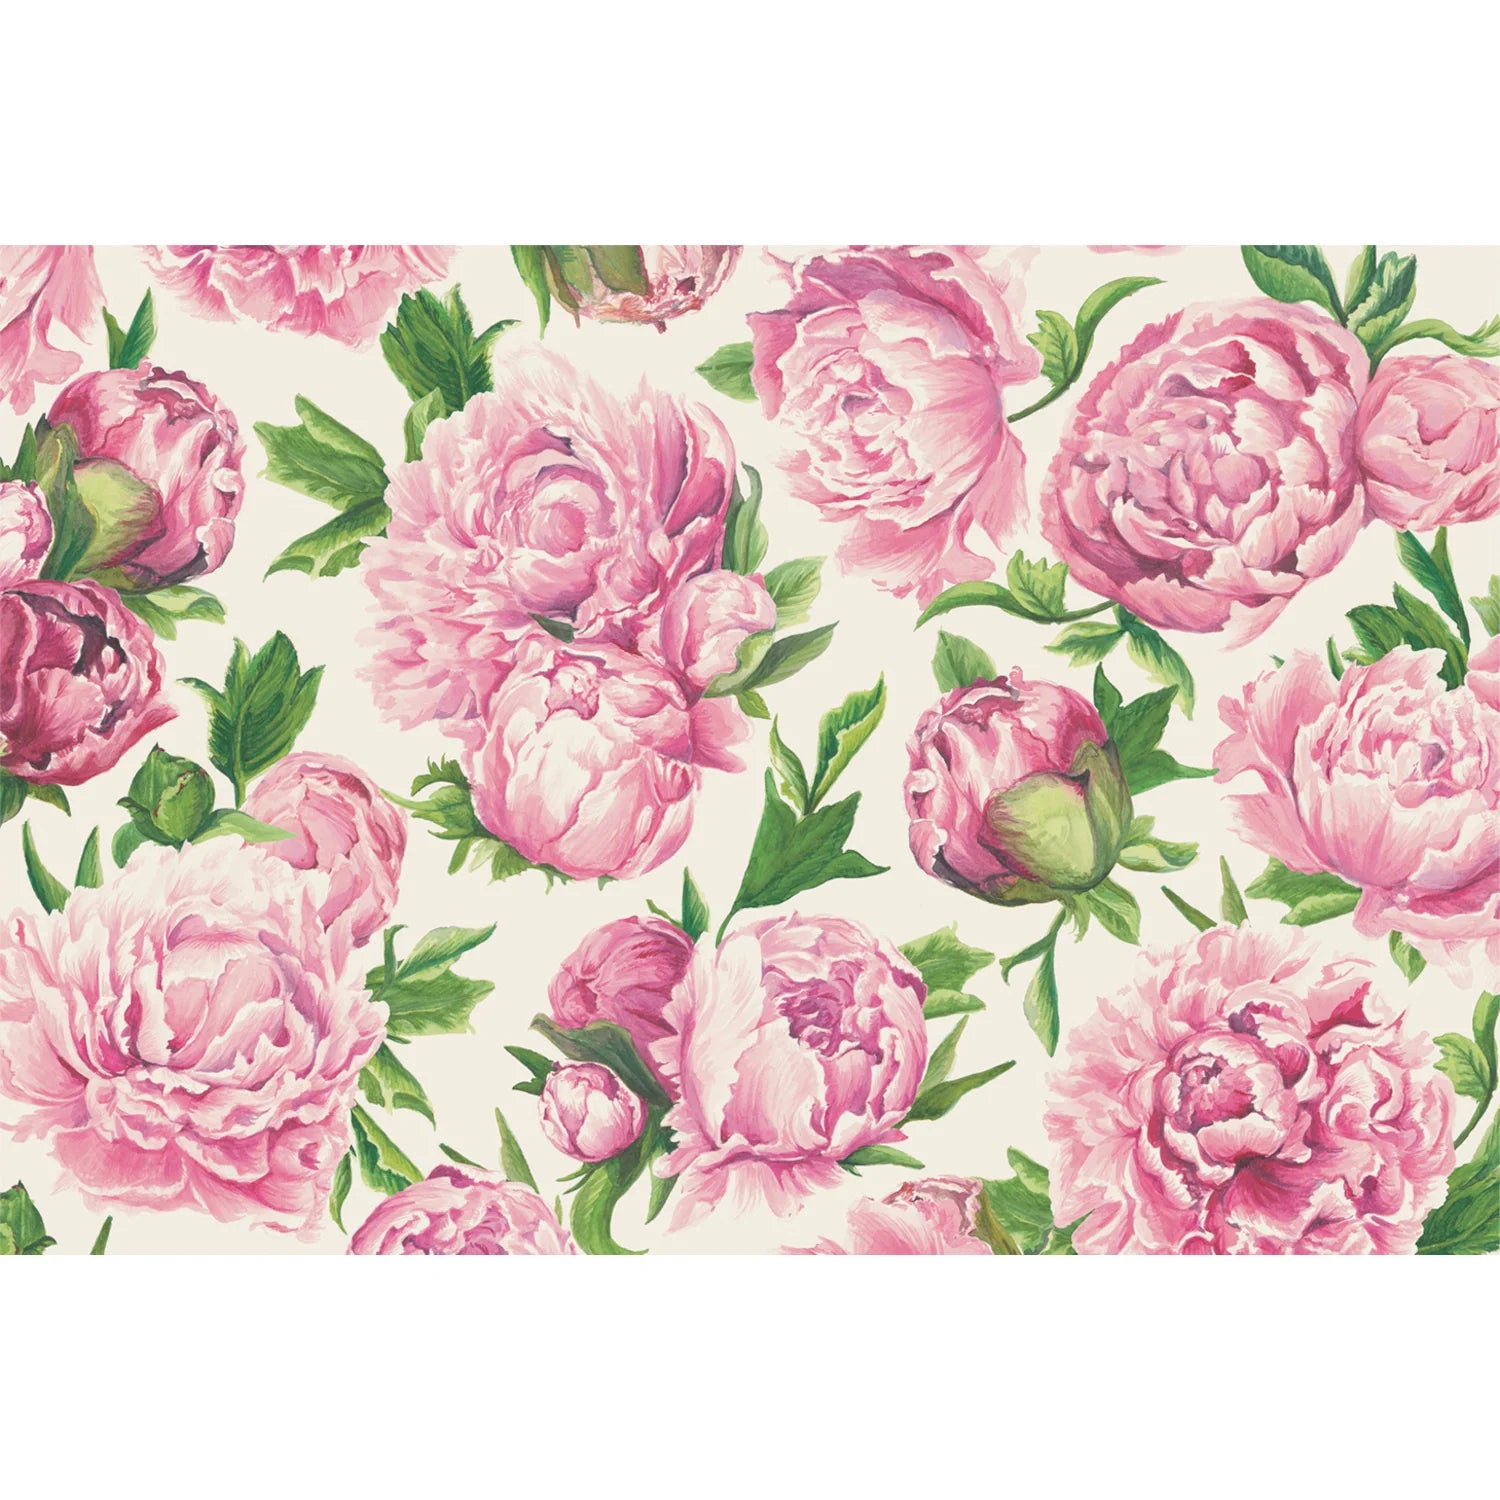 Peonies in Bloom Placemats